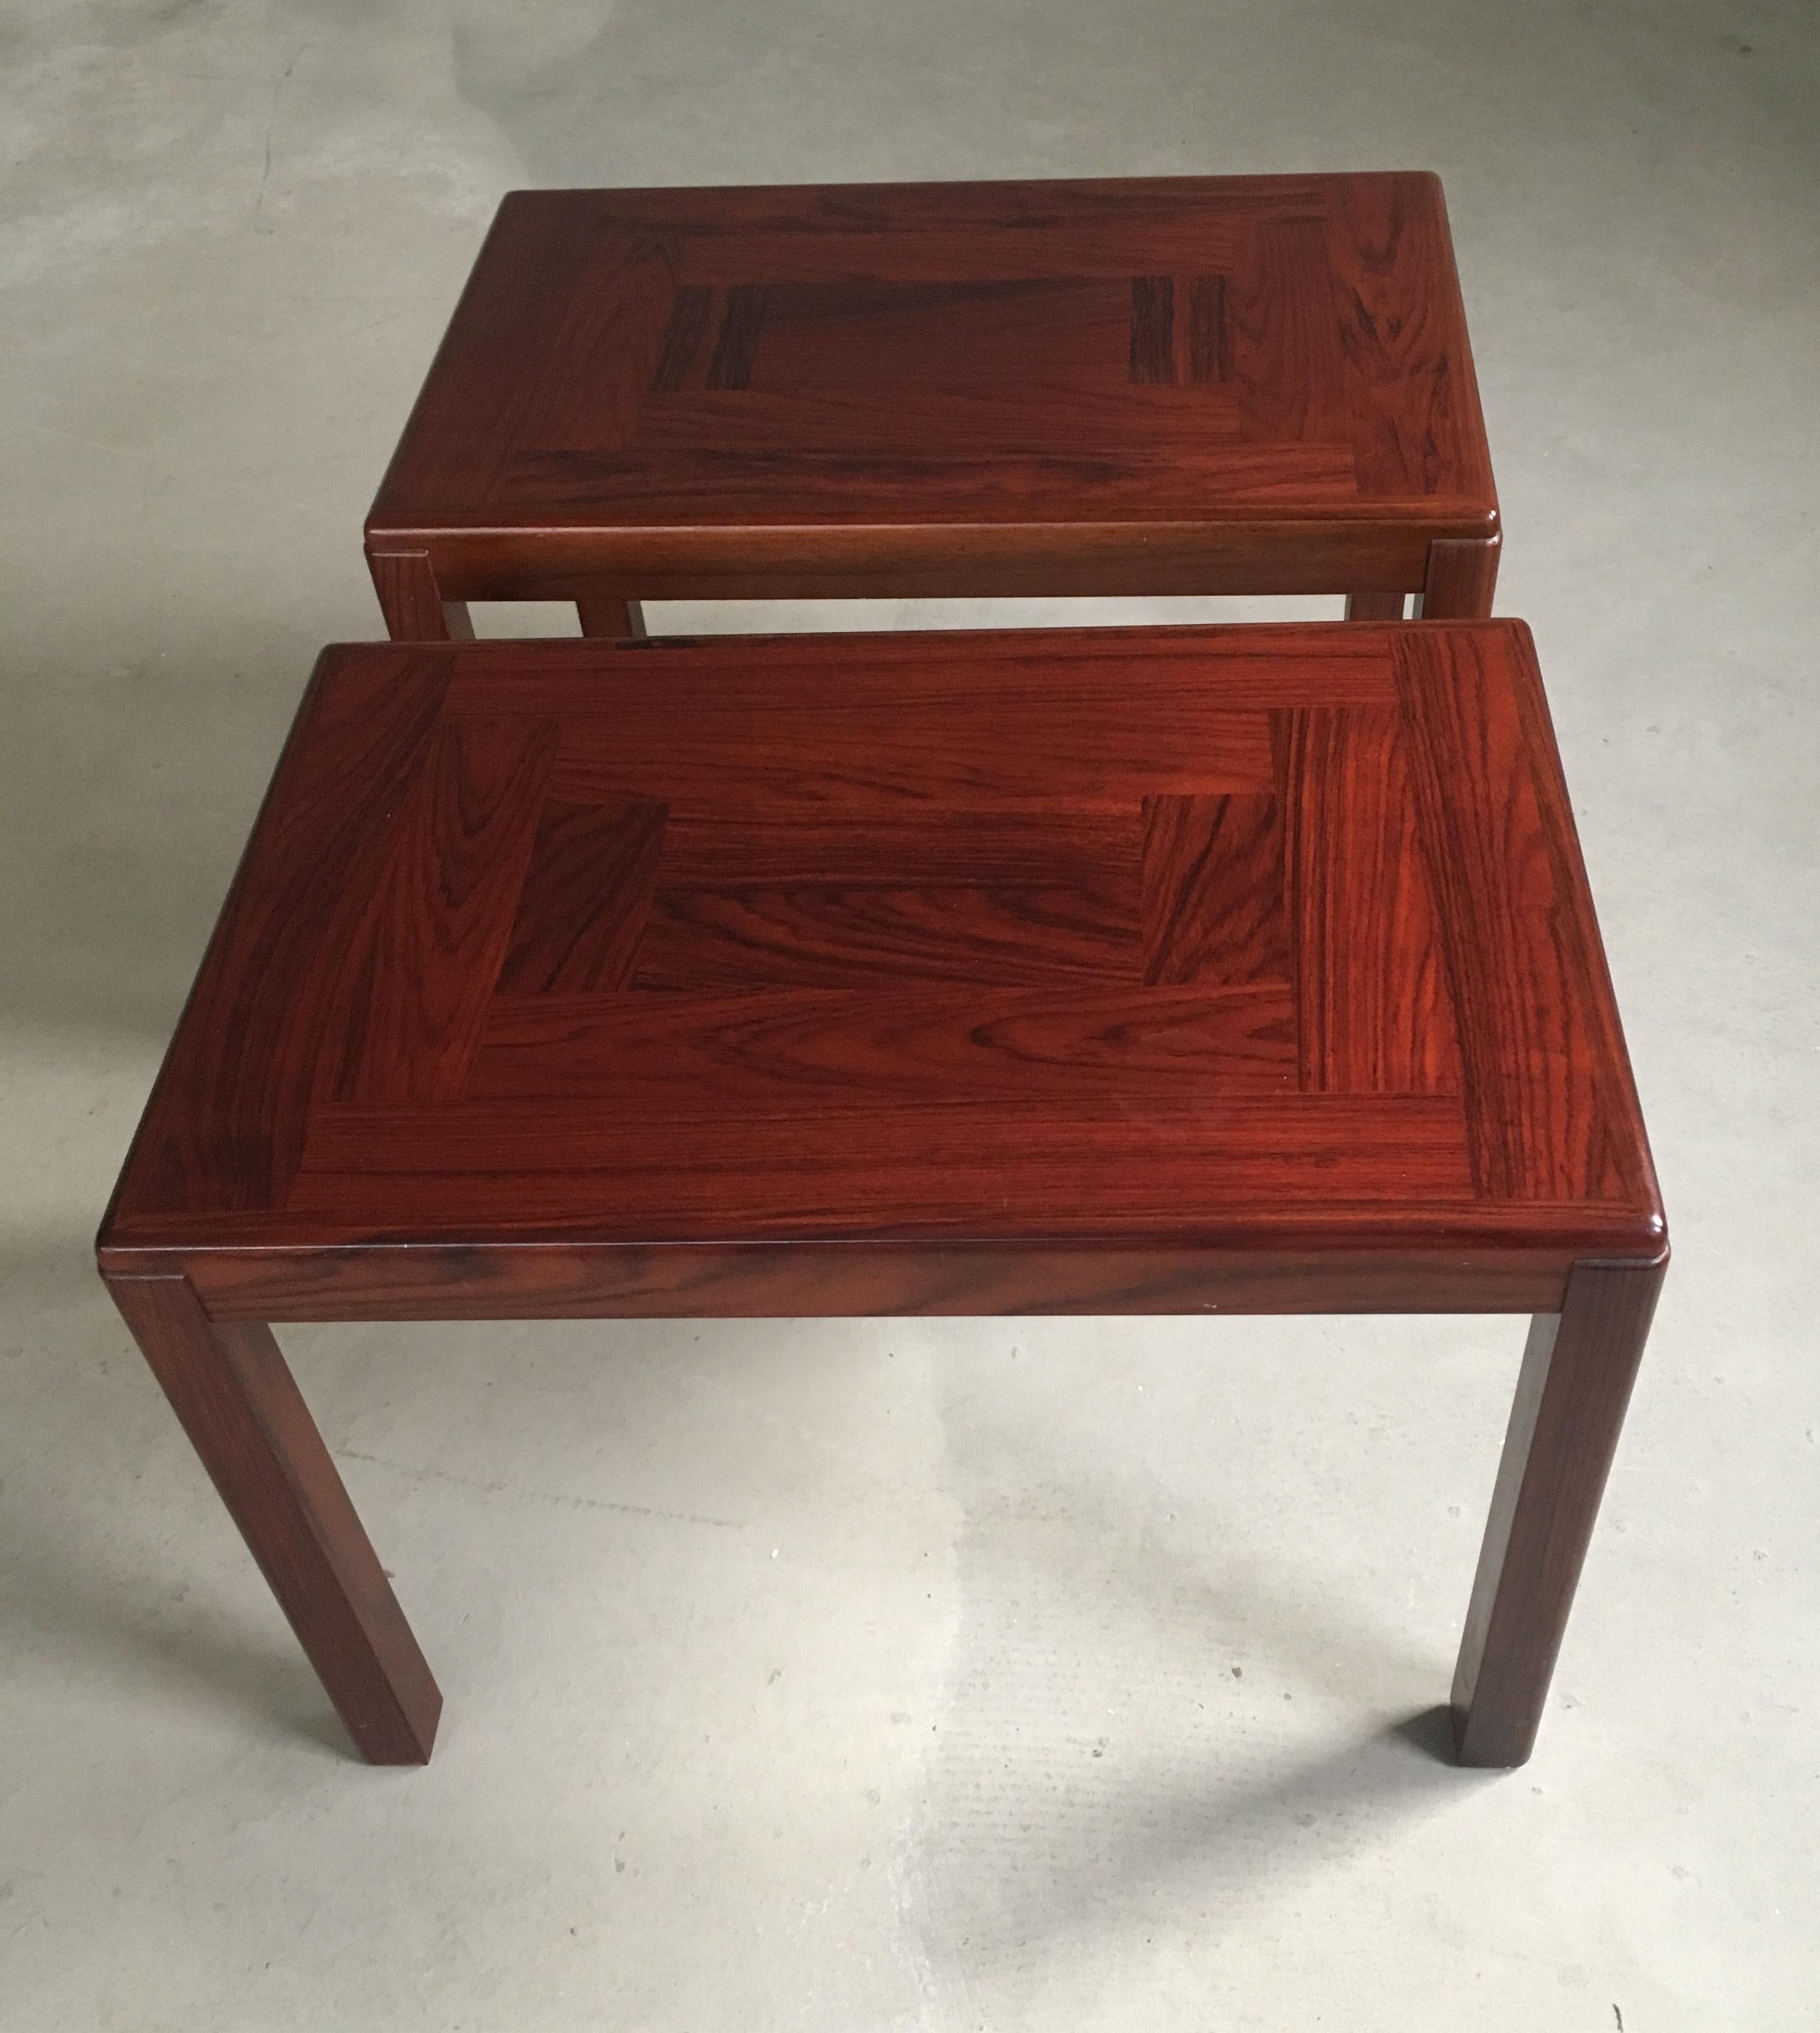 Set of two restored Danish 1970's side tables in mahogany by Vejse Stole og Møbelfabrik

The tables feature an exquisite mahogany veneer pattern on the tabletop and a strong frame that is able to handle heavy weight if needed.

The tables have been